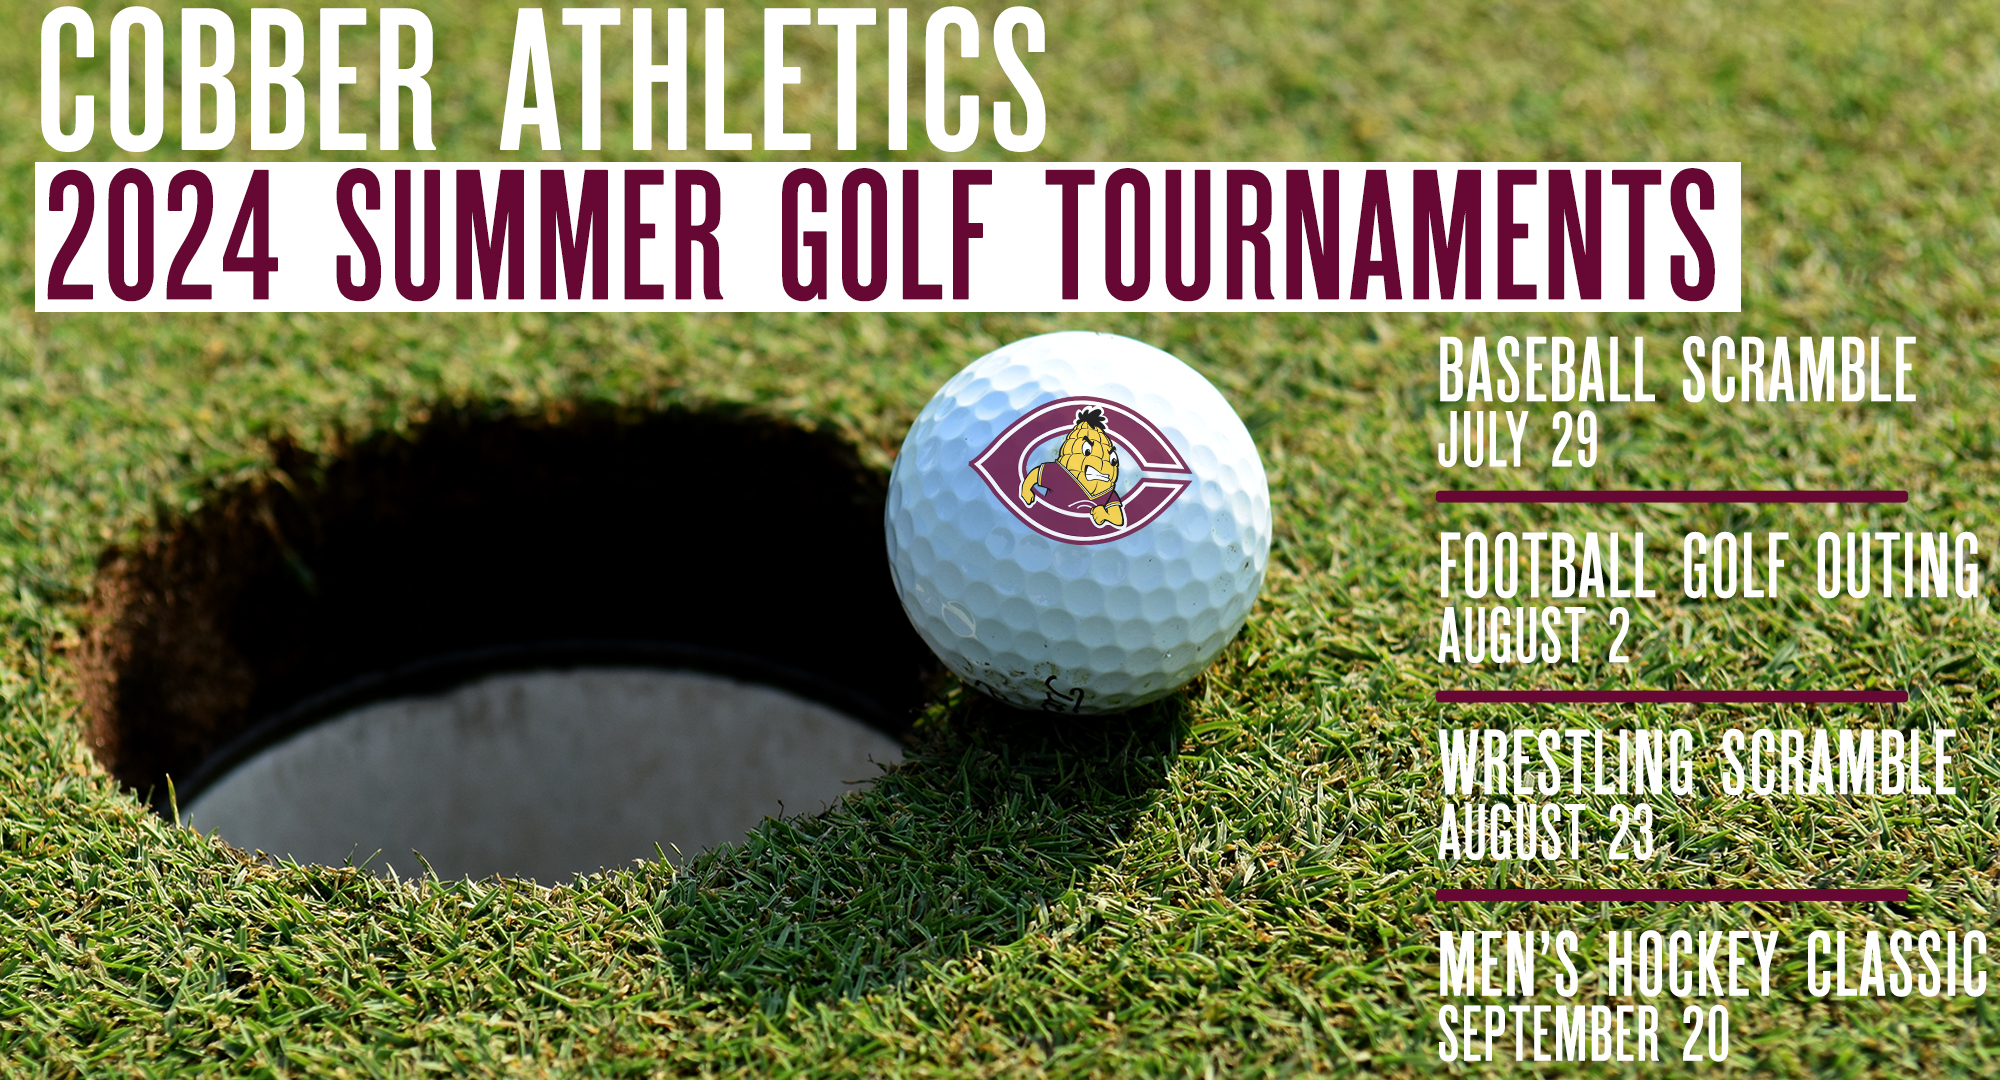 There will be four golf outings in the summer of '24 for Cobber athletic fans to connect with former alumni, friends and family.